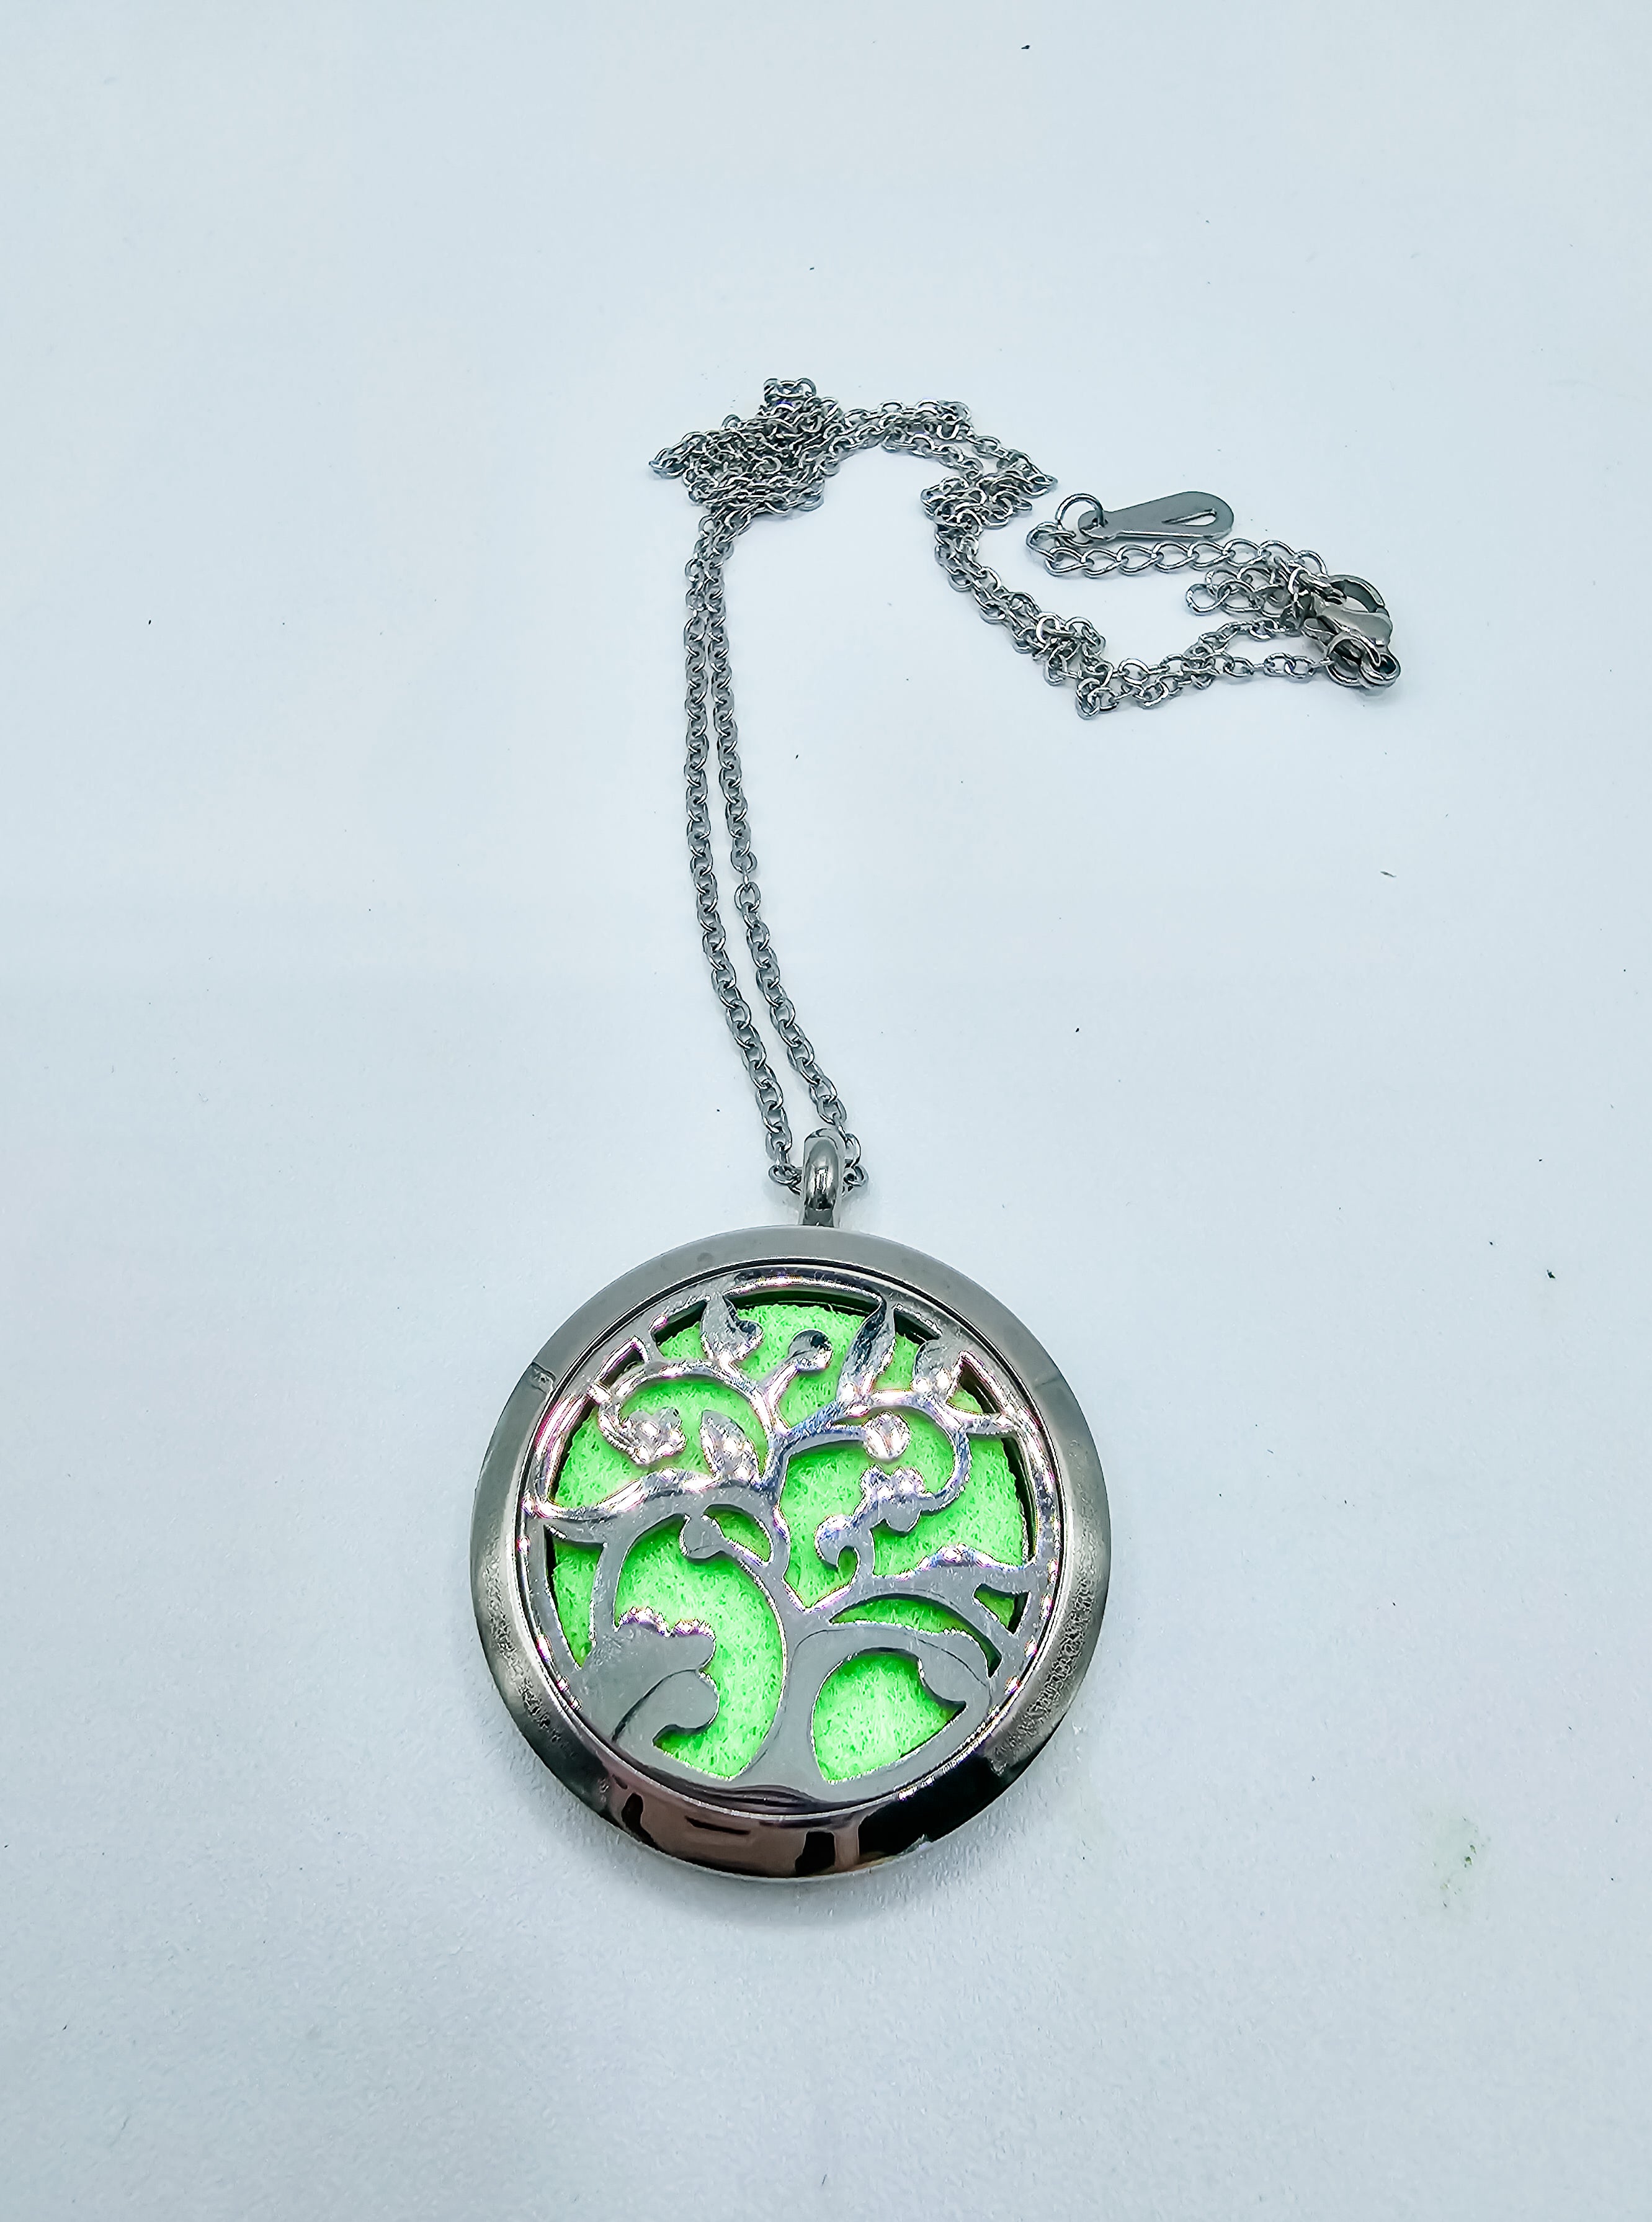 Aromatherapy - TREE OF LIFE, Diffuser Pendant Necklace